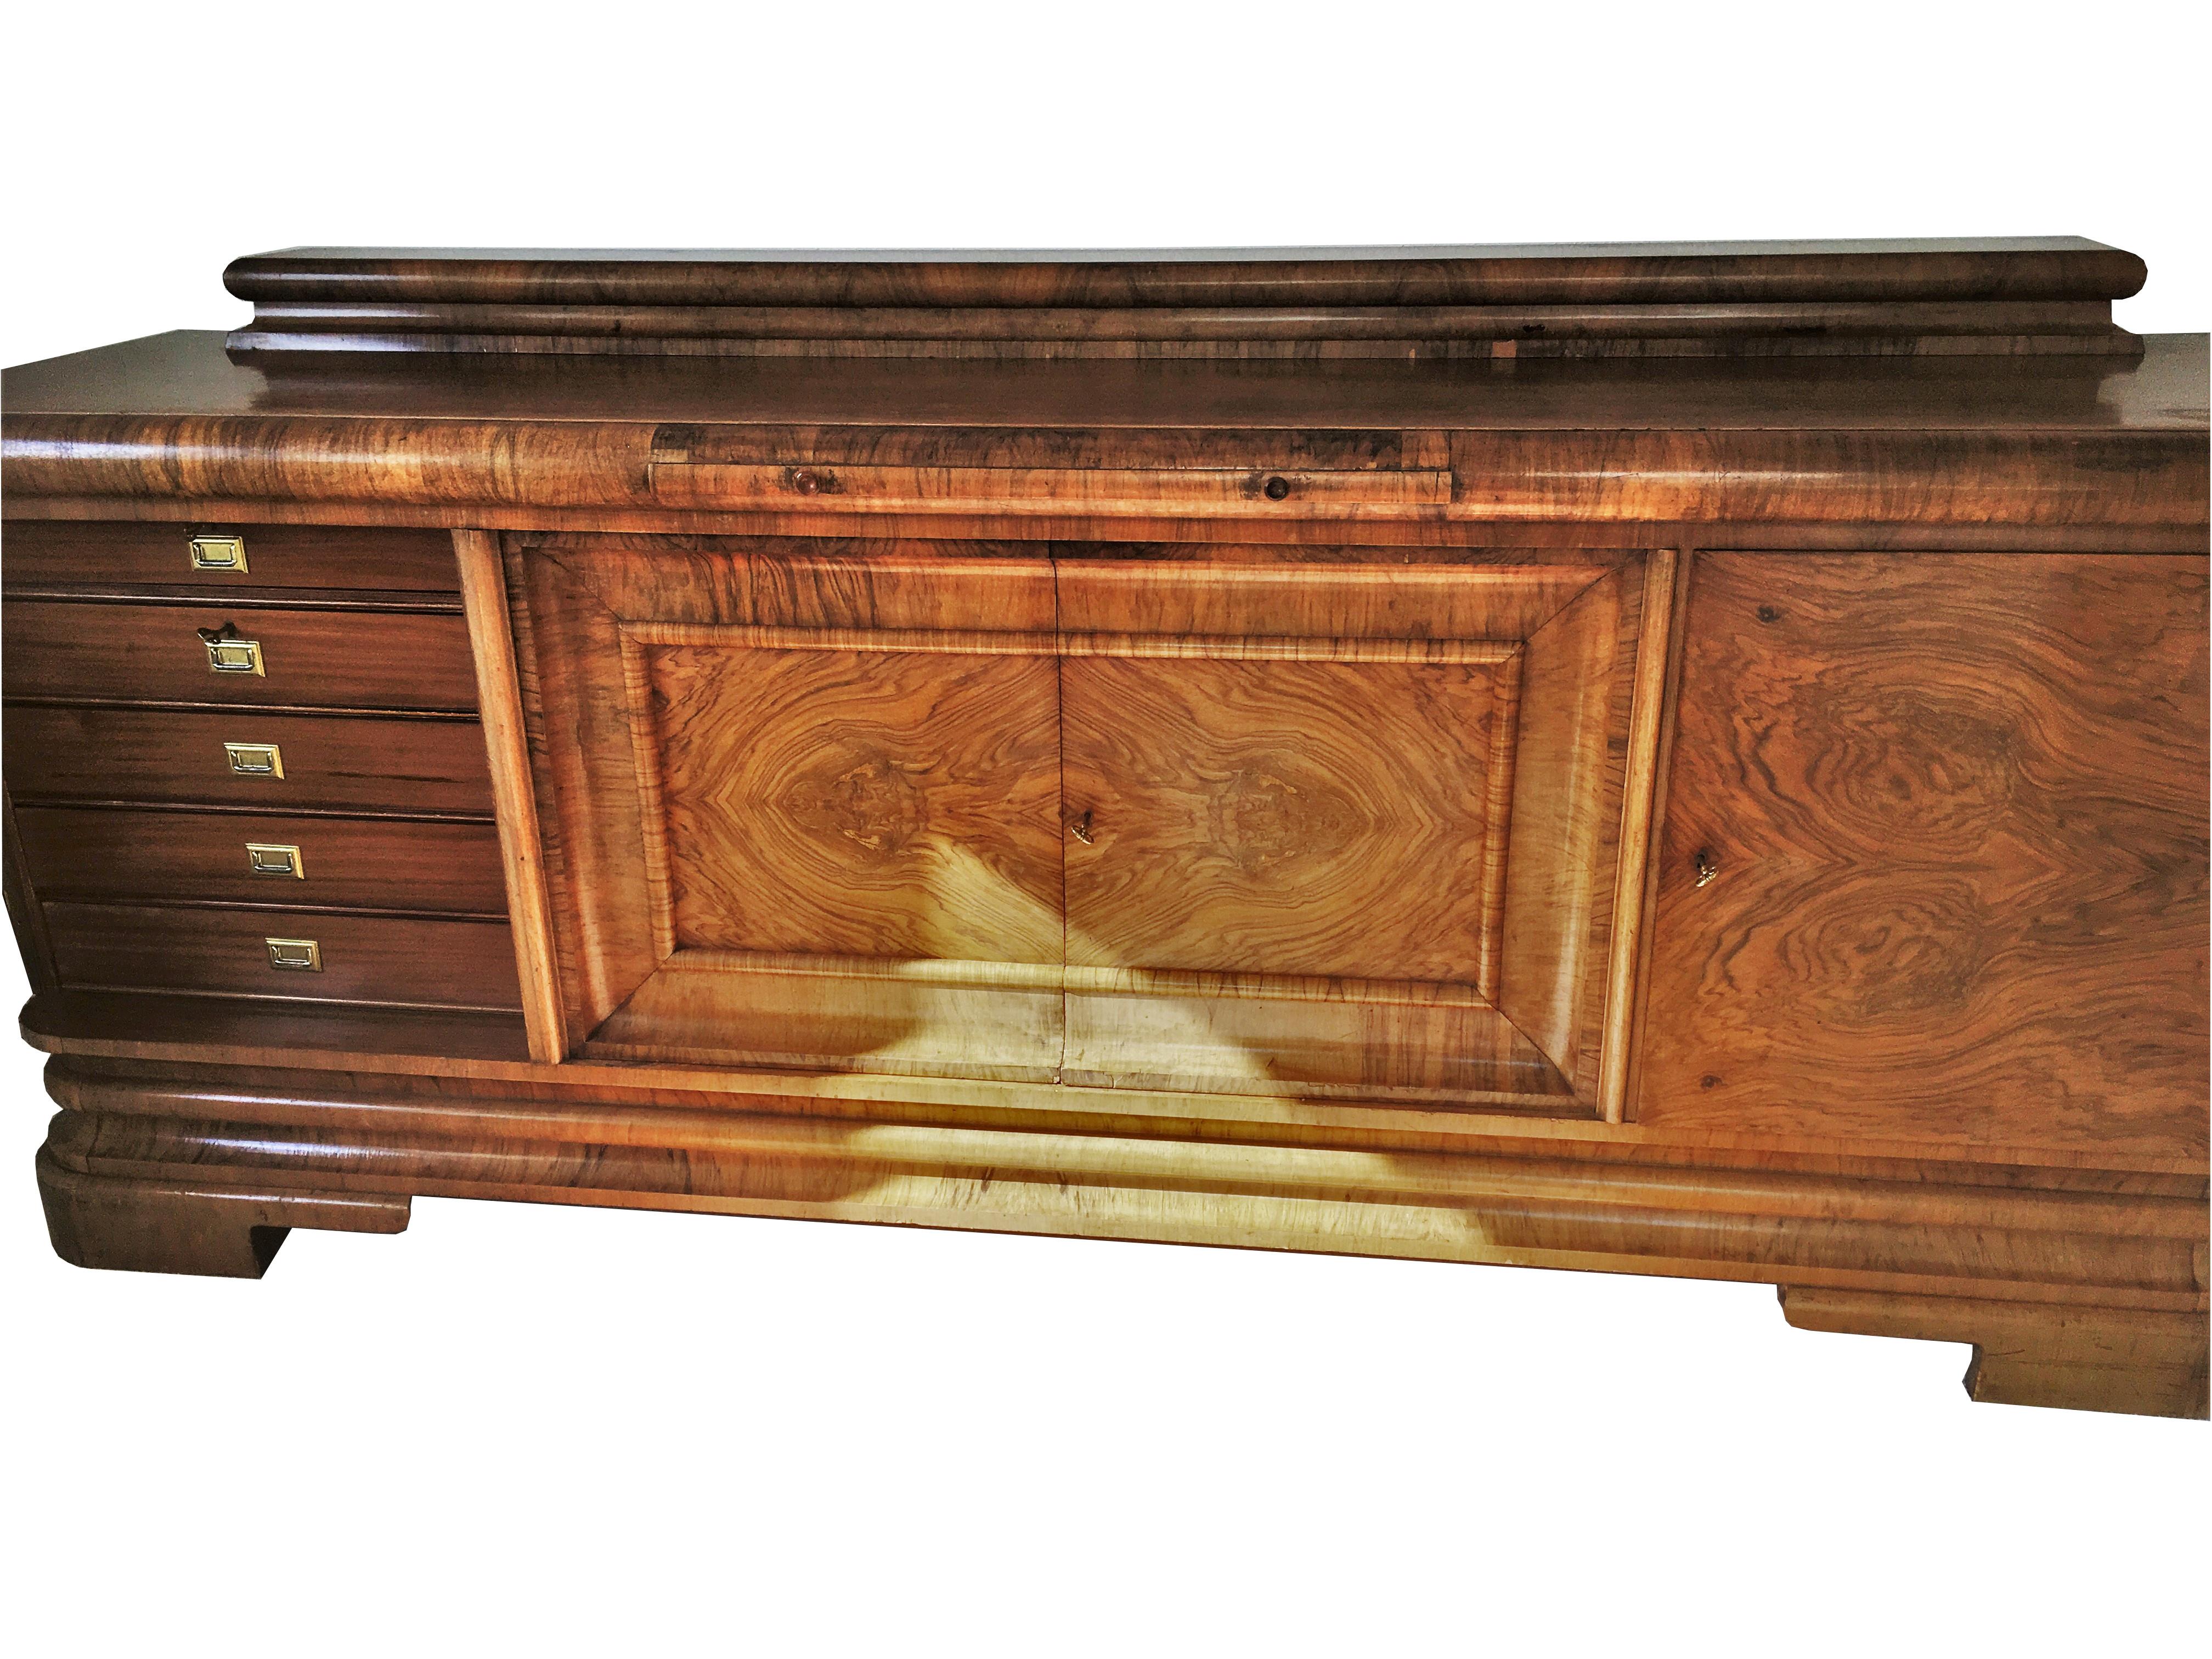 Wonderful 1920s Art Deco sideboard from Germany made of special walnut wood. Offers a classic design with four large doors and a red marble extension plate. On the top you will find a 11cm / 4? high hutch and on the inside five drawers as well as